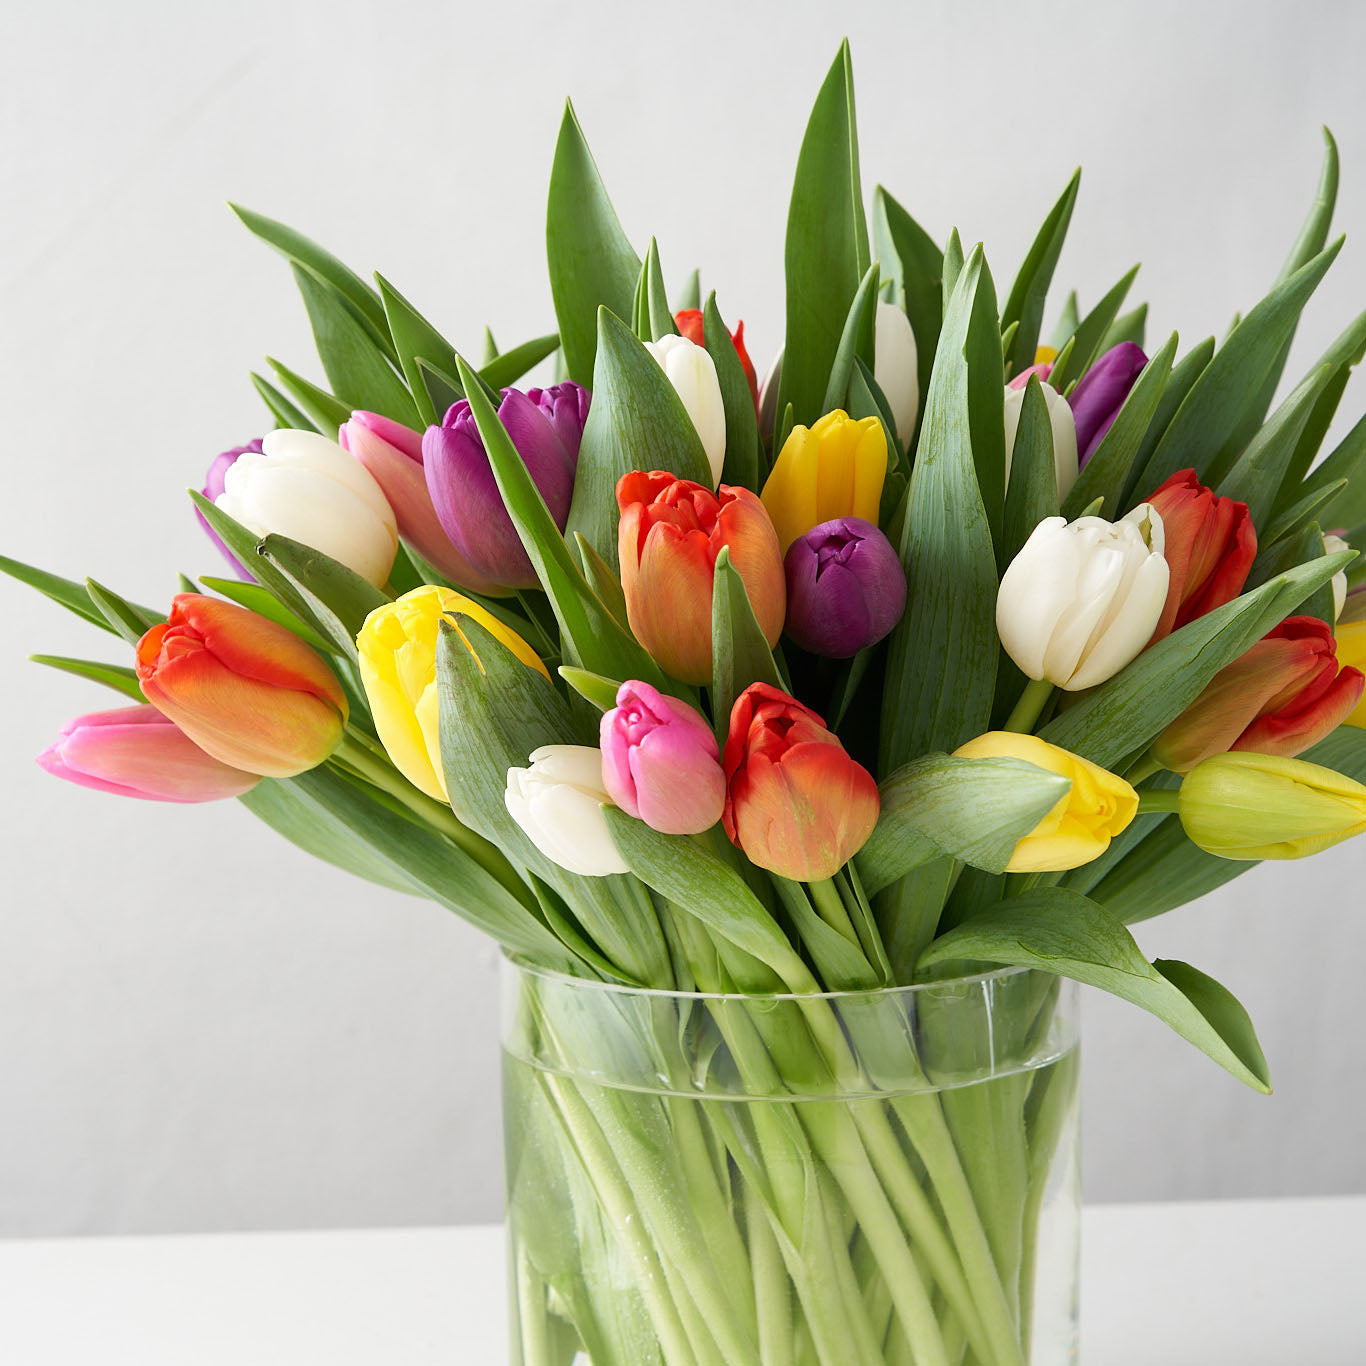 CUT MULTICOLORED TULIPS IN A CLEAR VASE